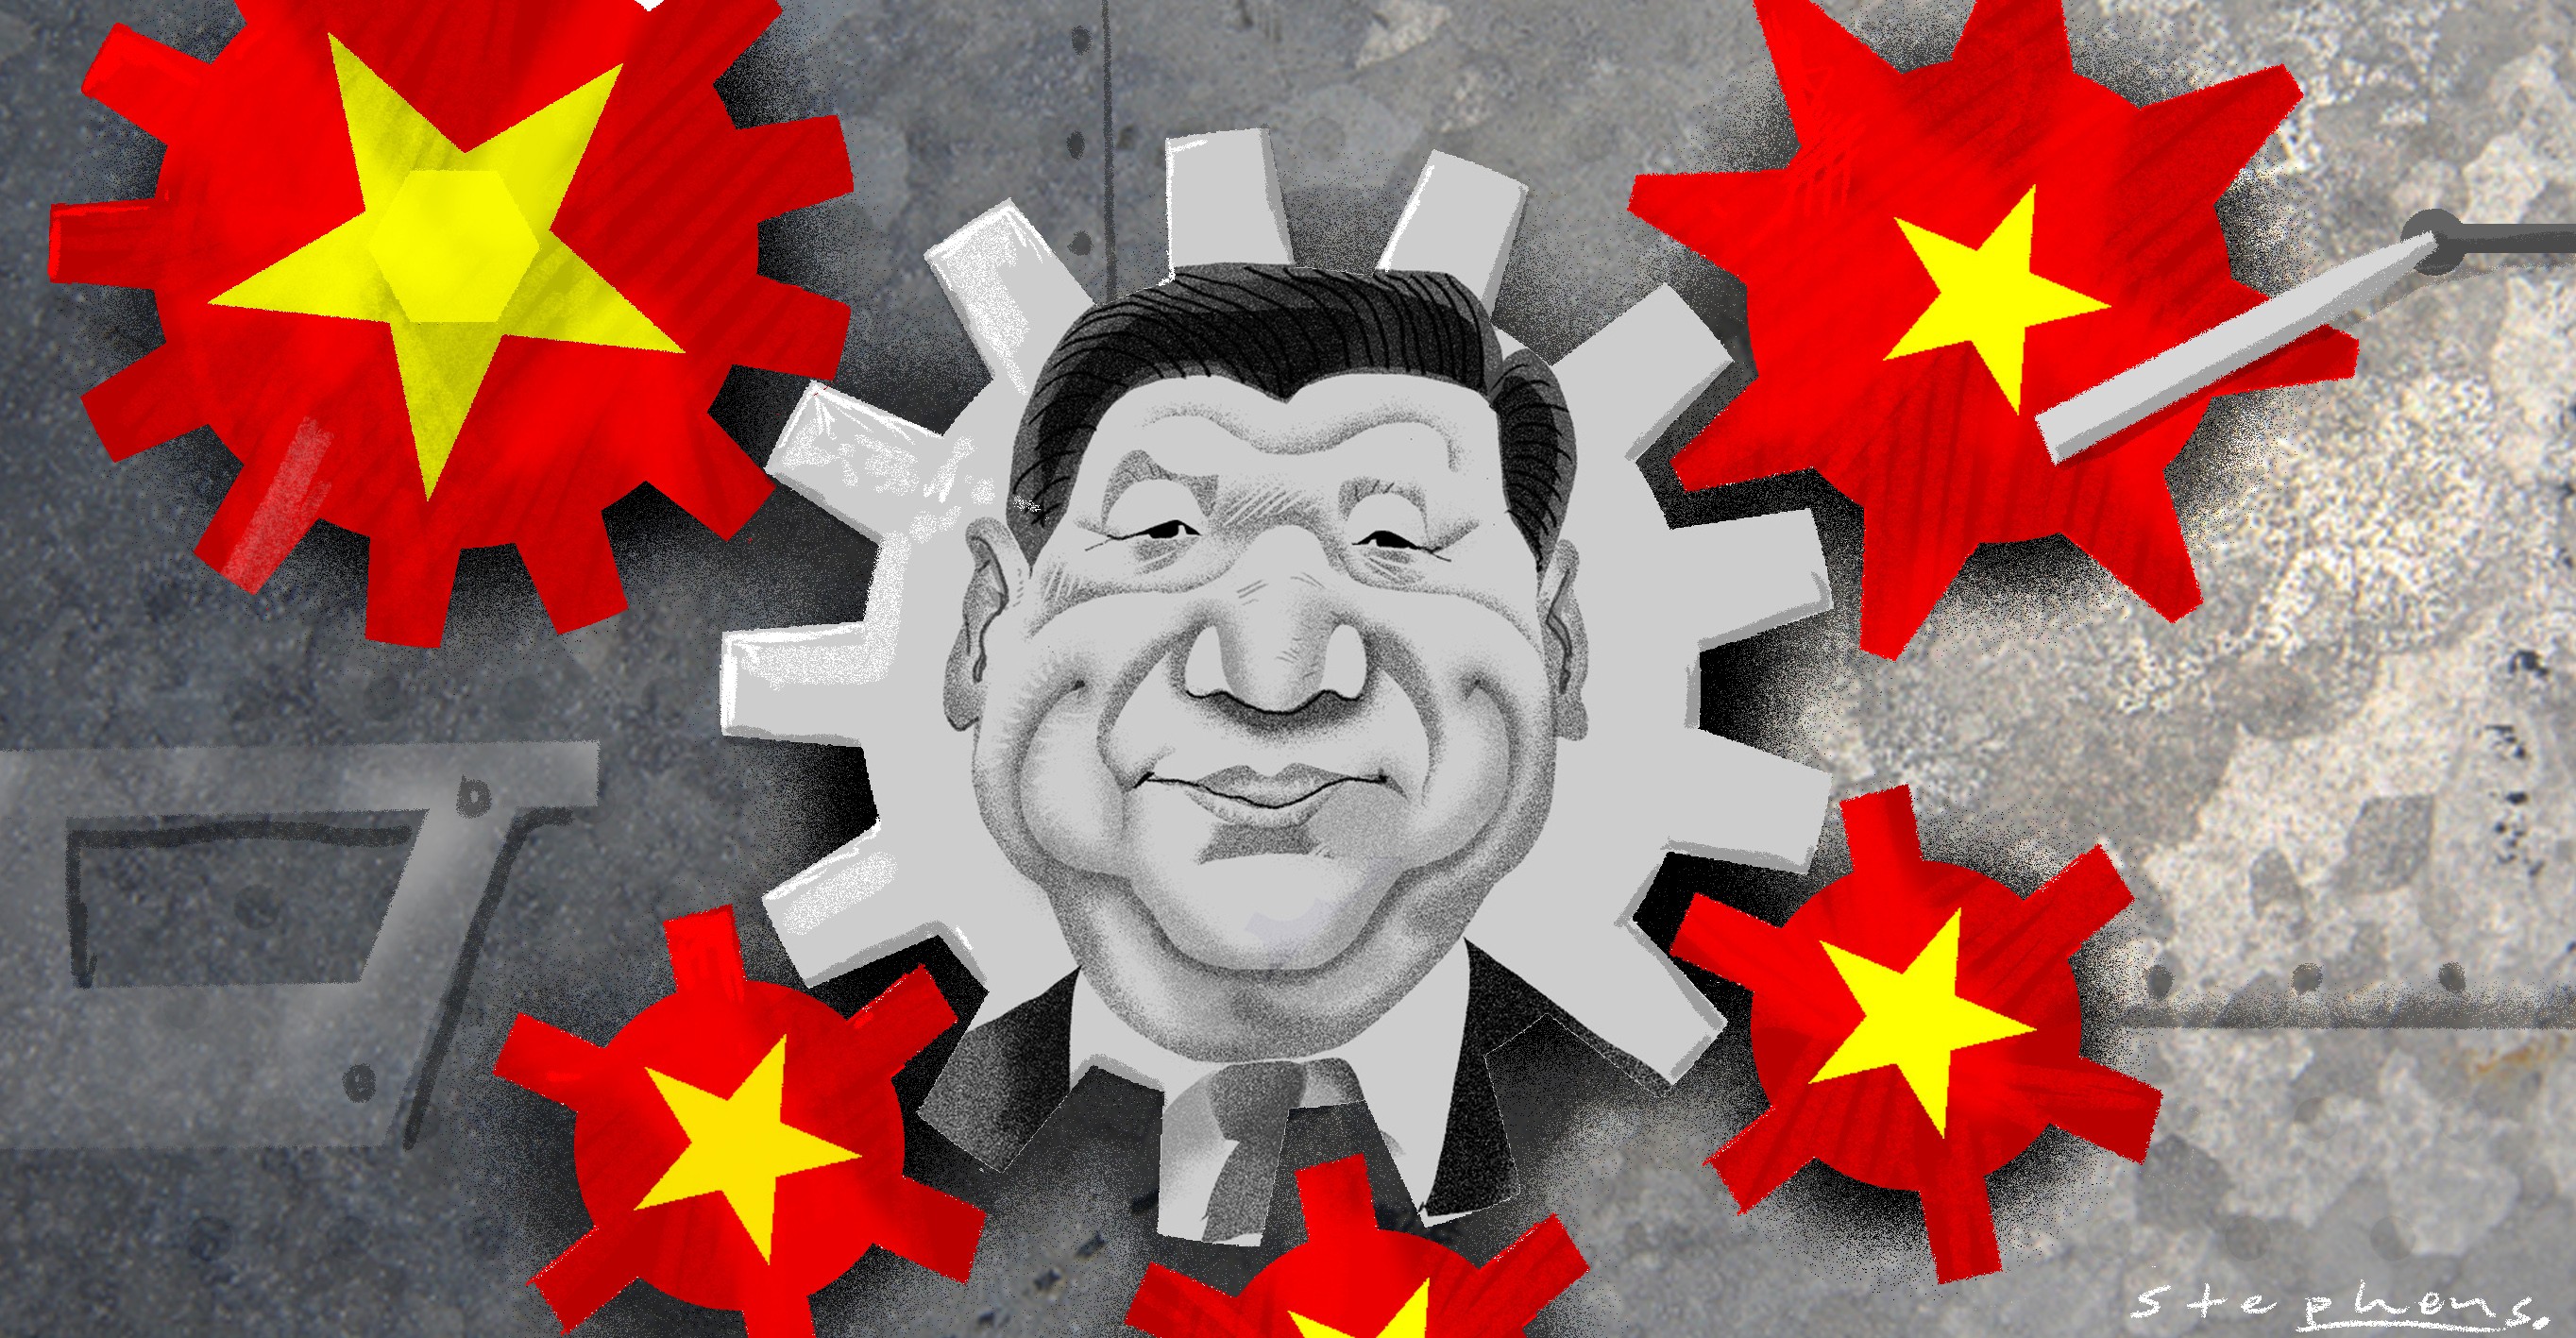 The next 10 to 15 years are crucial for China’s development. The political system is still young and evolving and the challenges it faces, both internally and externally, are complex. Illustration: Craig Stephens